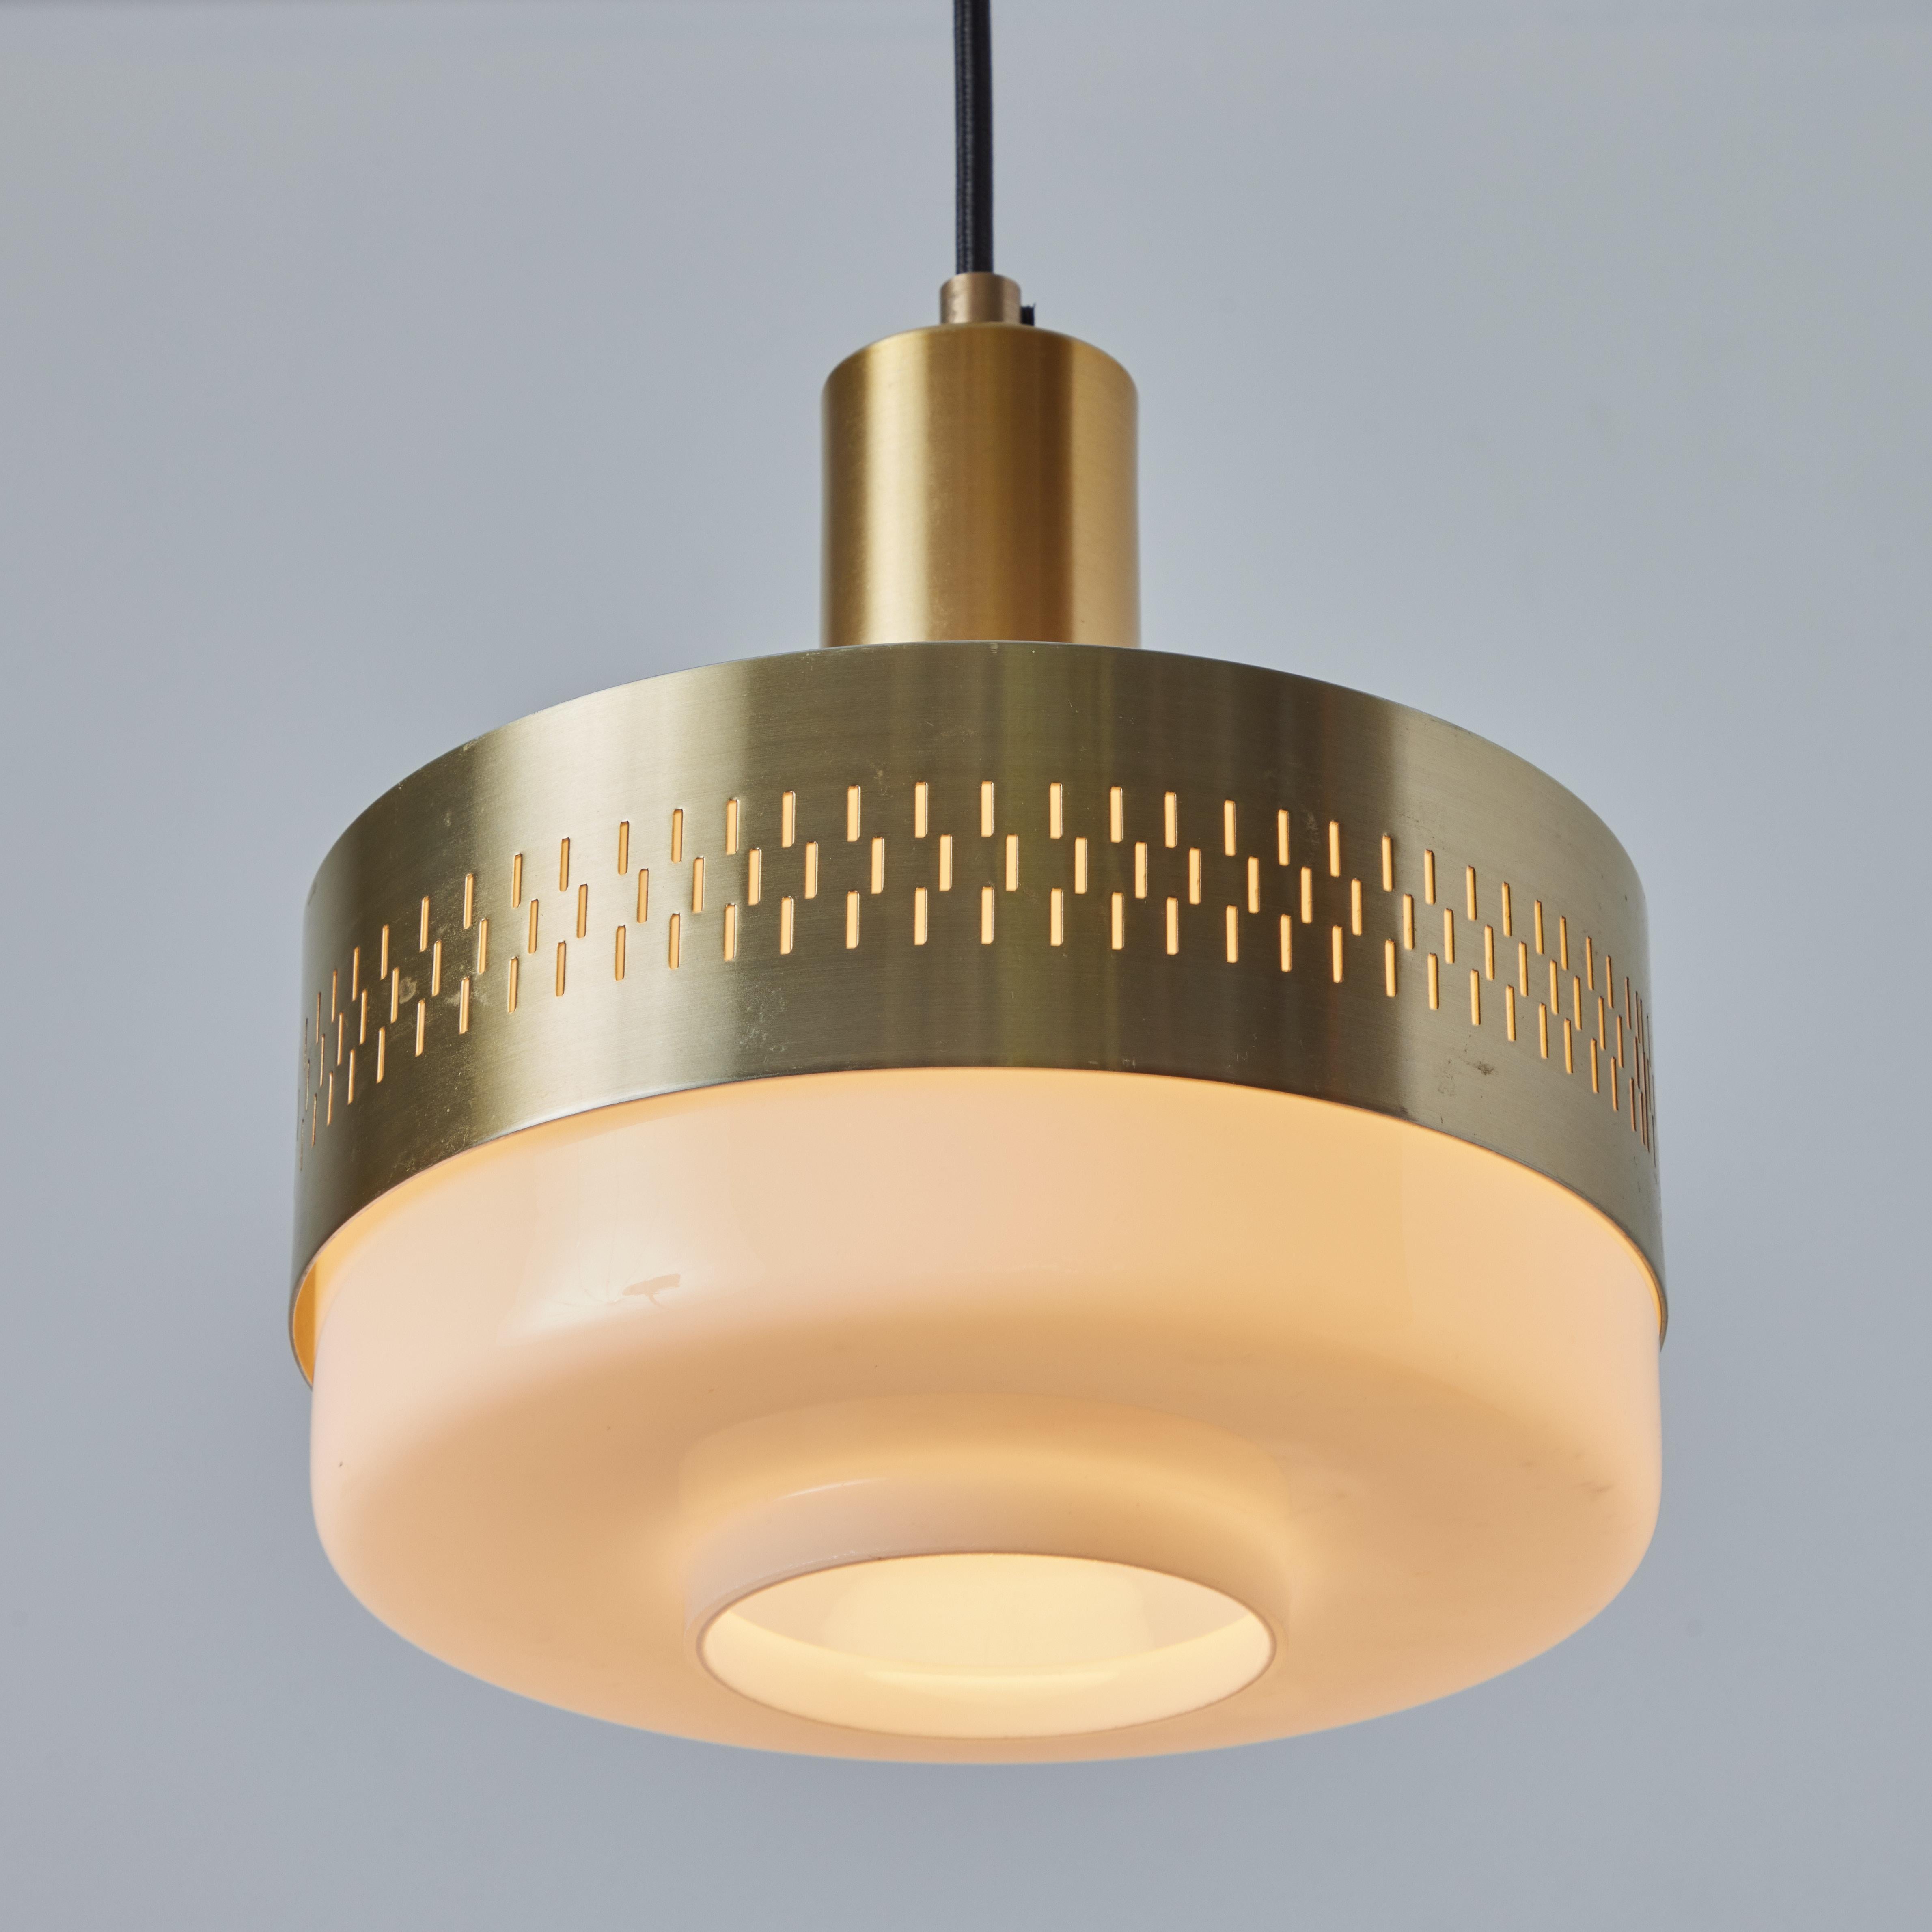 1960s Perforated brass & glass pendant attributed to Hans-Agne Jakobsson. Graced with simple Scandinavian curves and pleasing brass patina. A highly sculptural pendant lamp of attractive scale and incomparable refinement. Unmarked.

Price is per